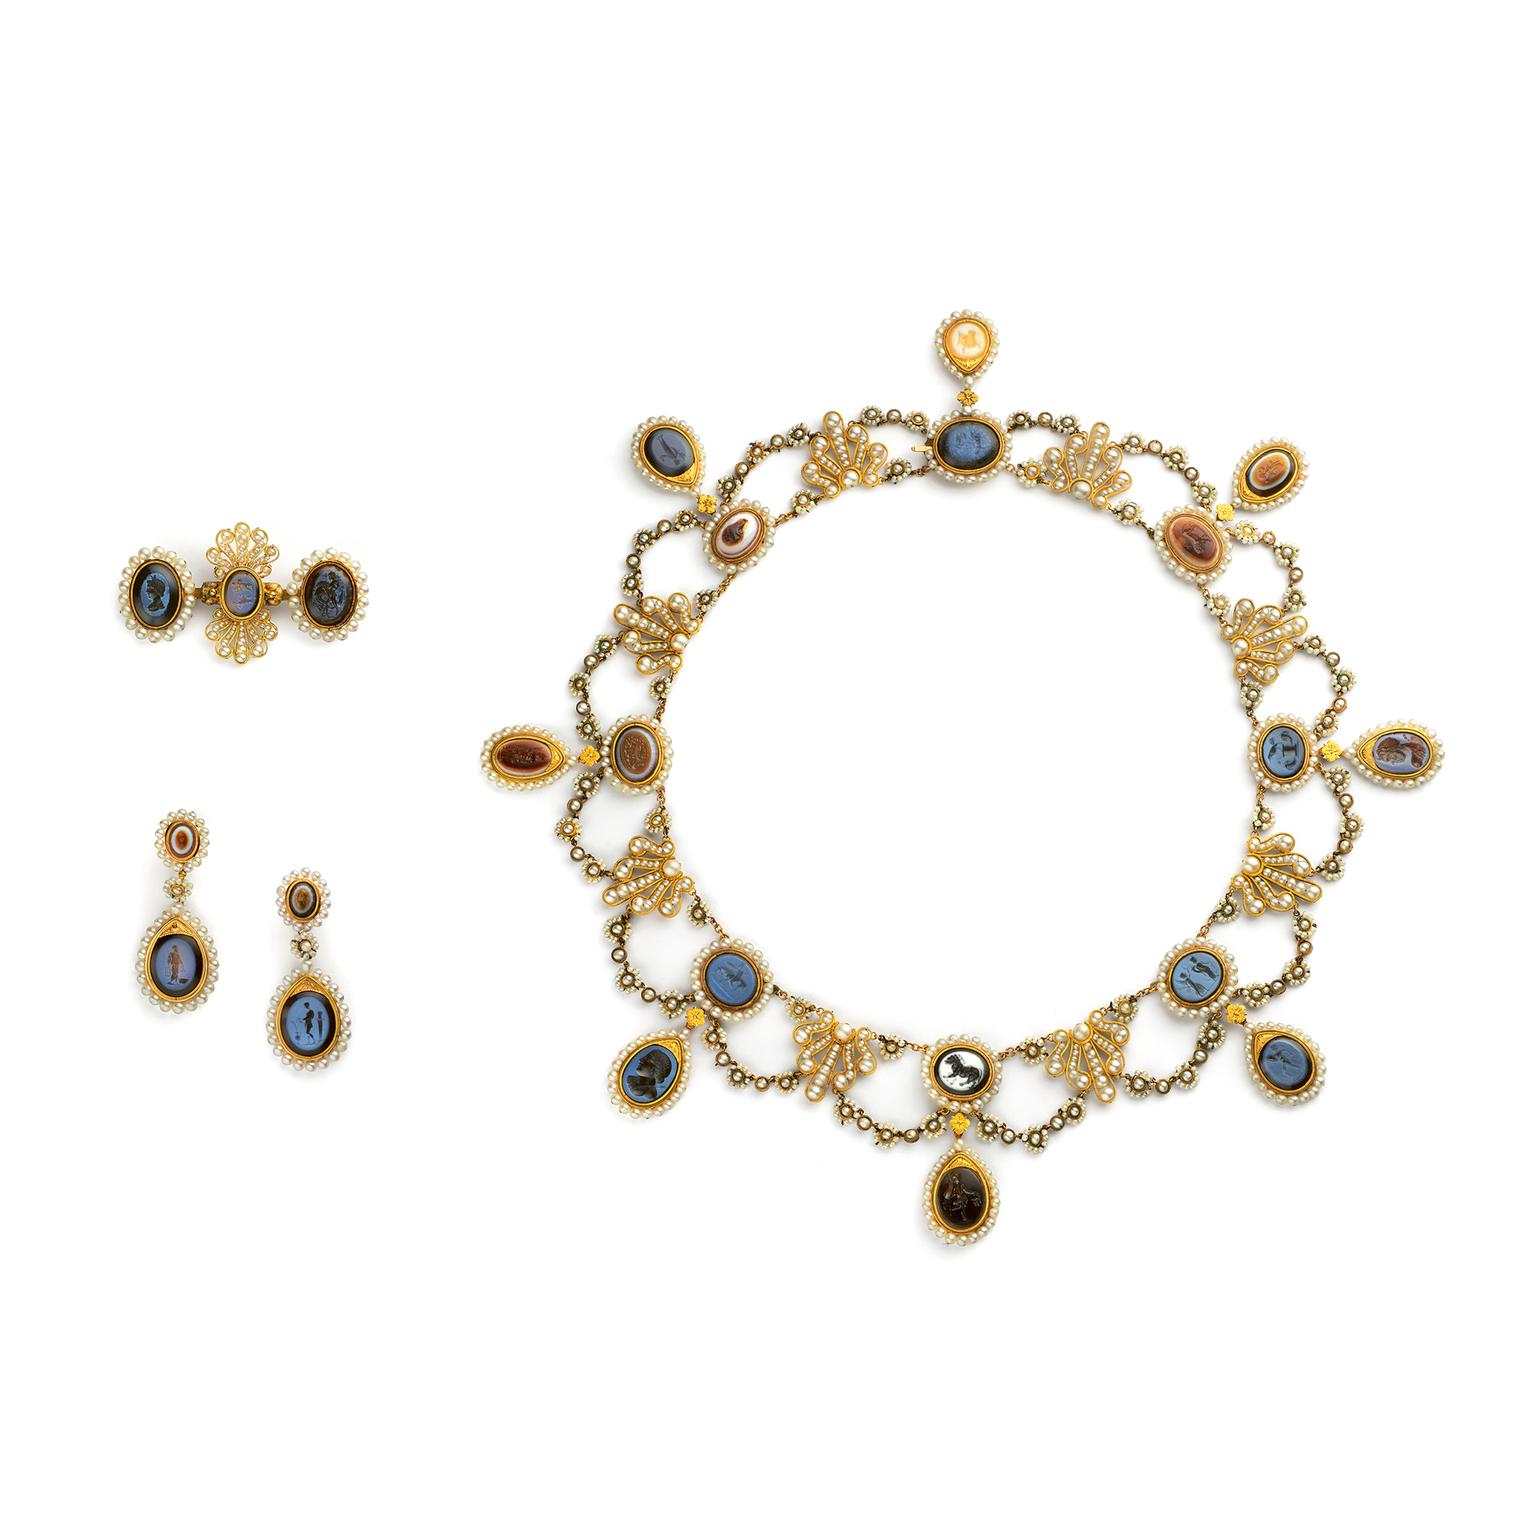 Chaumet Intaglio necklace, brooch and earrings